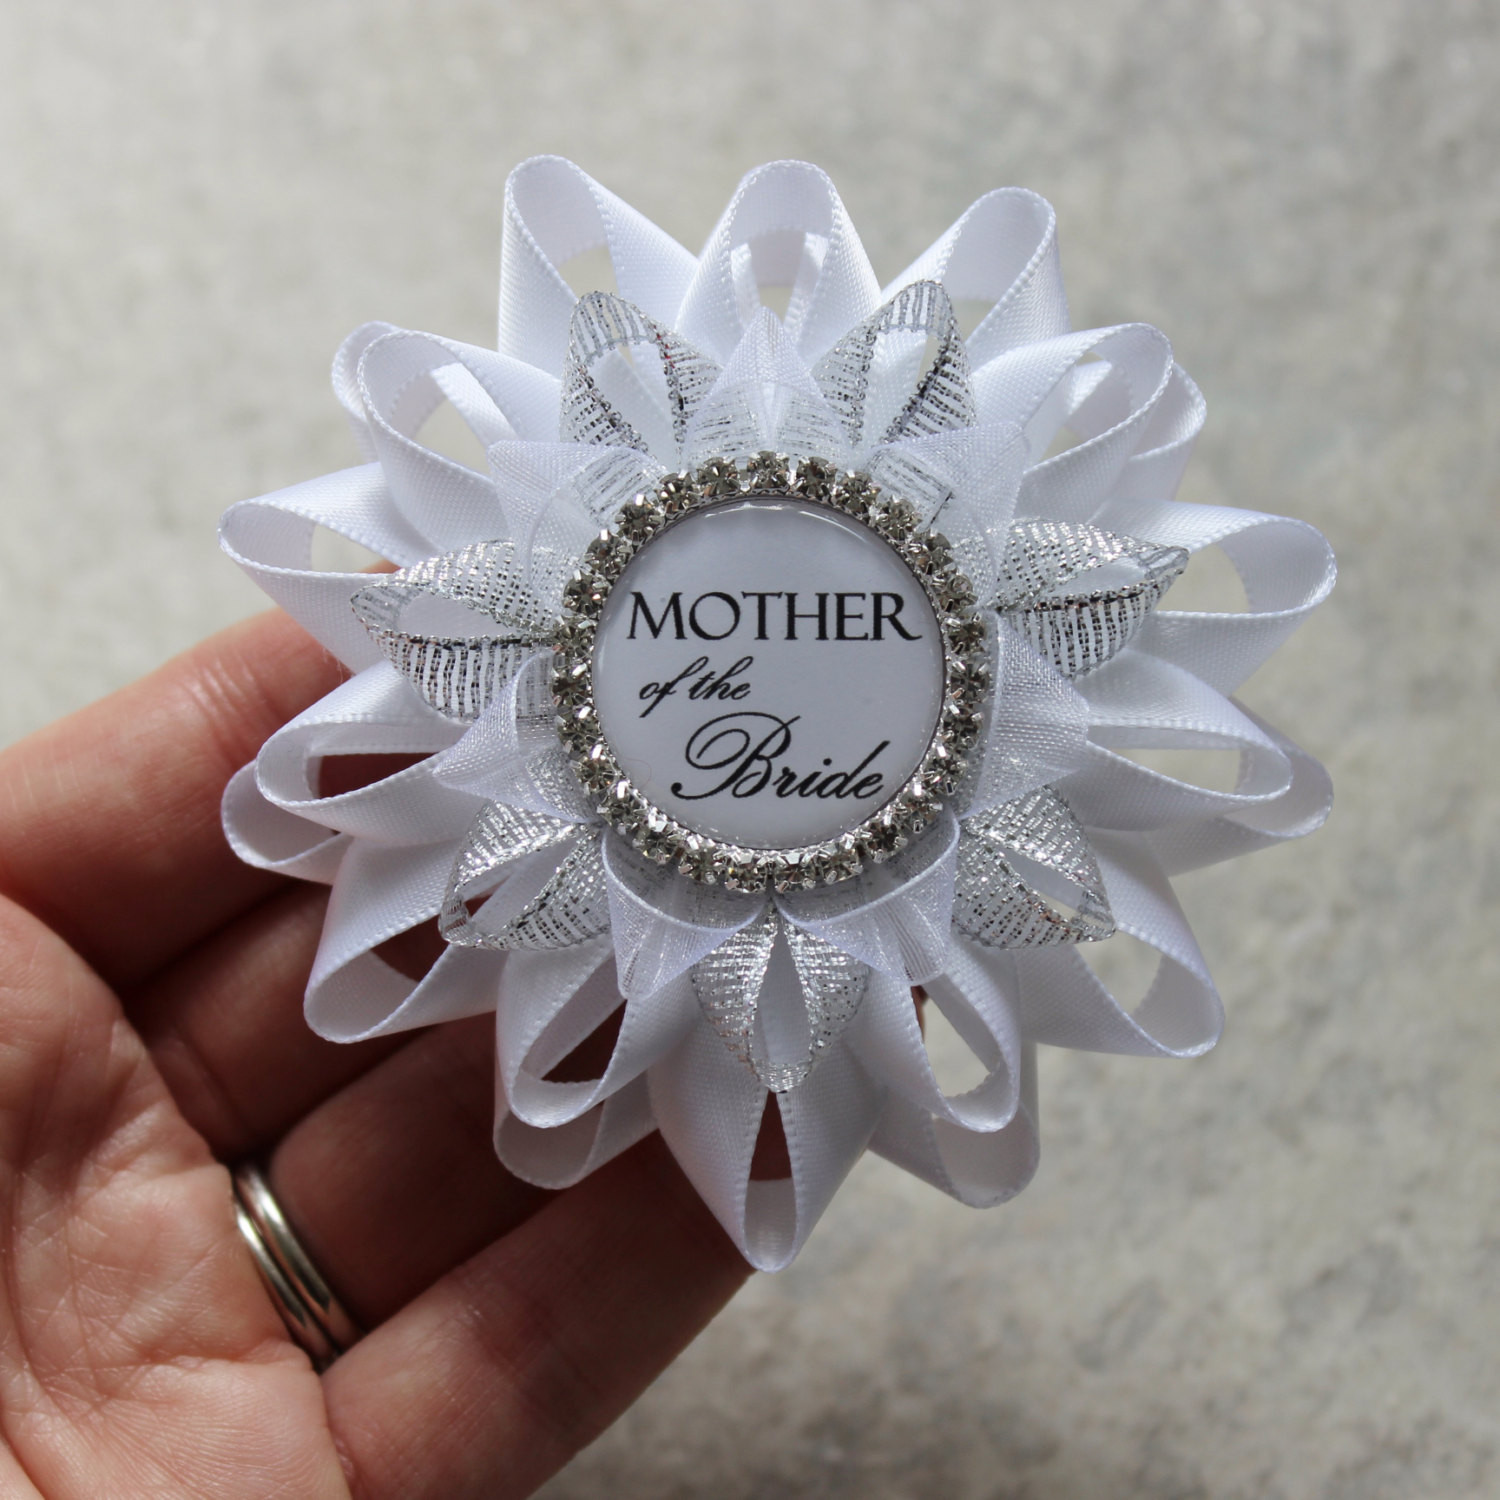 Bridal Shower Gift Ideas From Mother Of The Bride
 Mother of the Bride Gift Mother of the Groom Gift Bridal